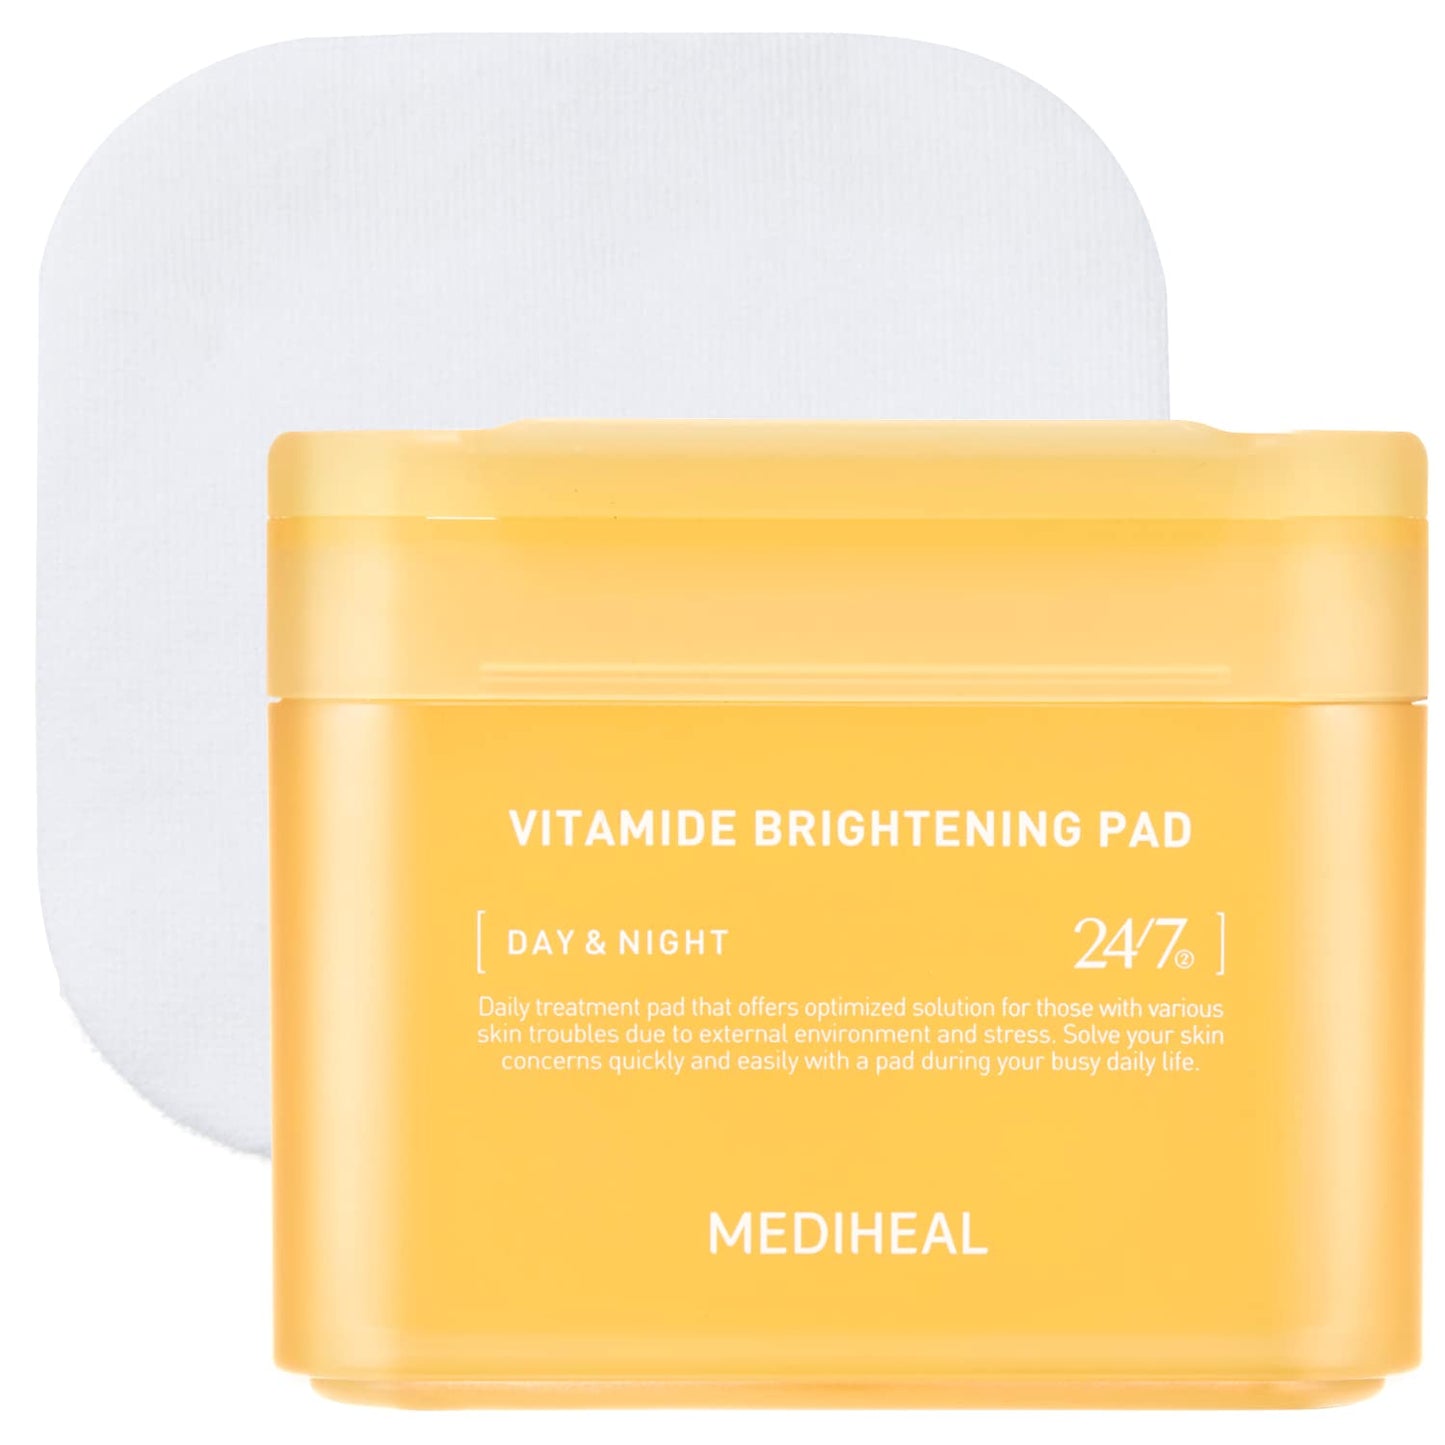 MEDIHEAL Vitamide Brightening Pad - Vegan Face Hypoallergenic Pads with Niacinamide, Sea Buckthorn - Radiance Boosting Pads for Clear, Illuminating Skin 100 Pads